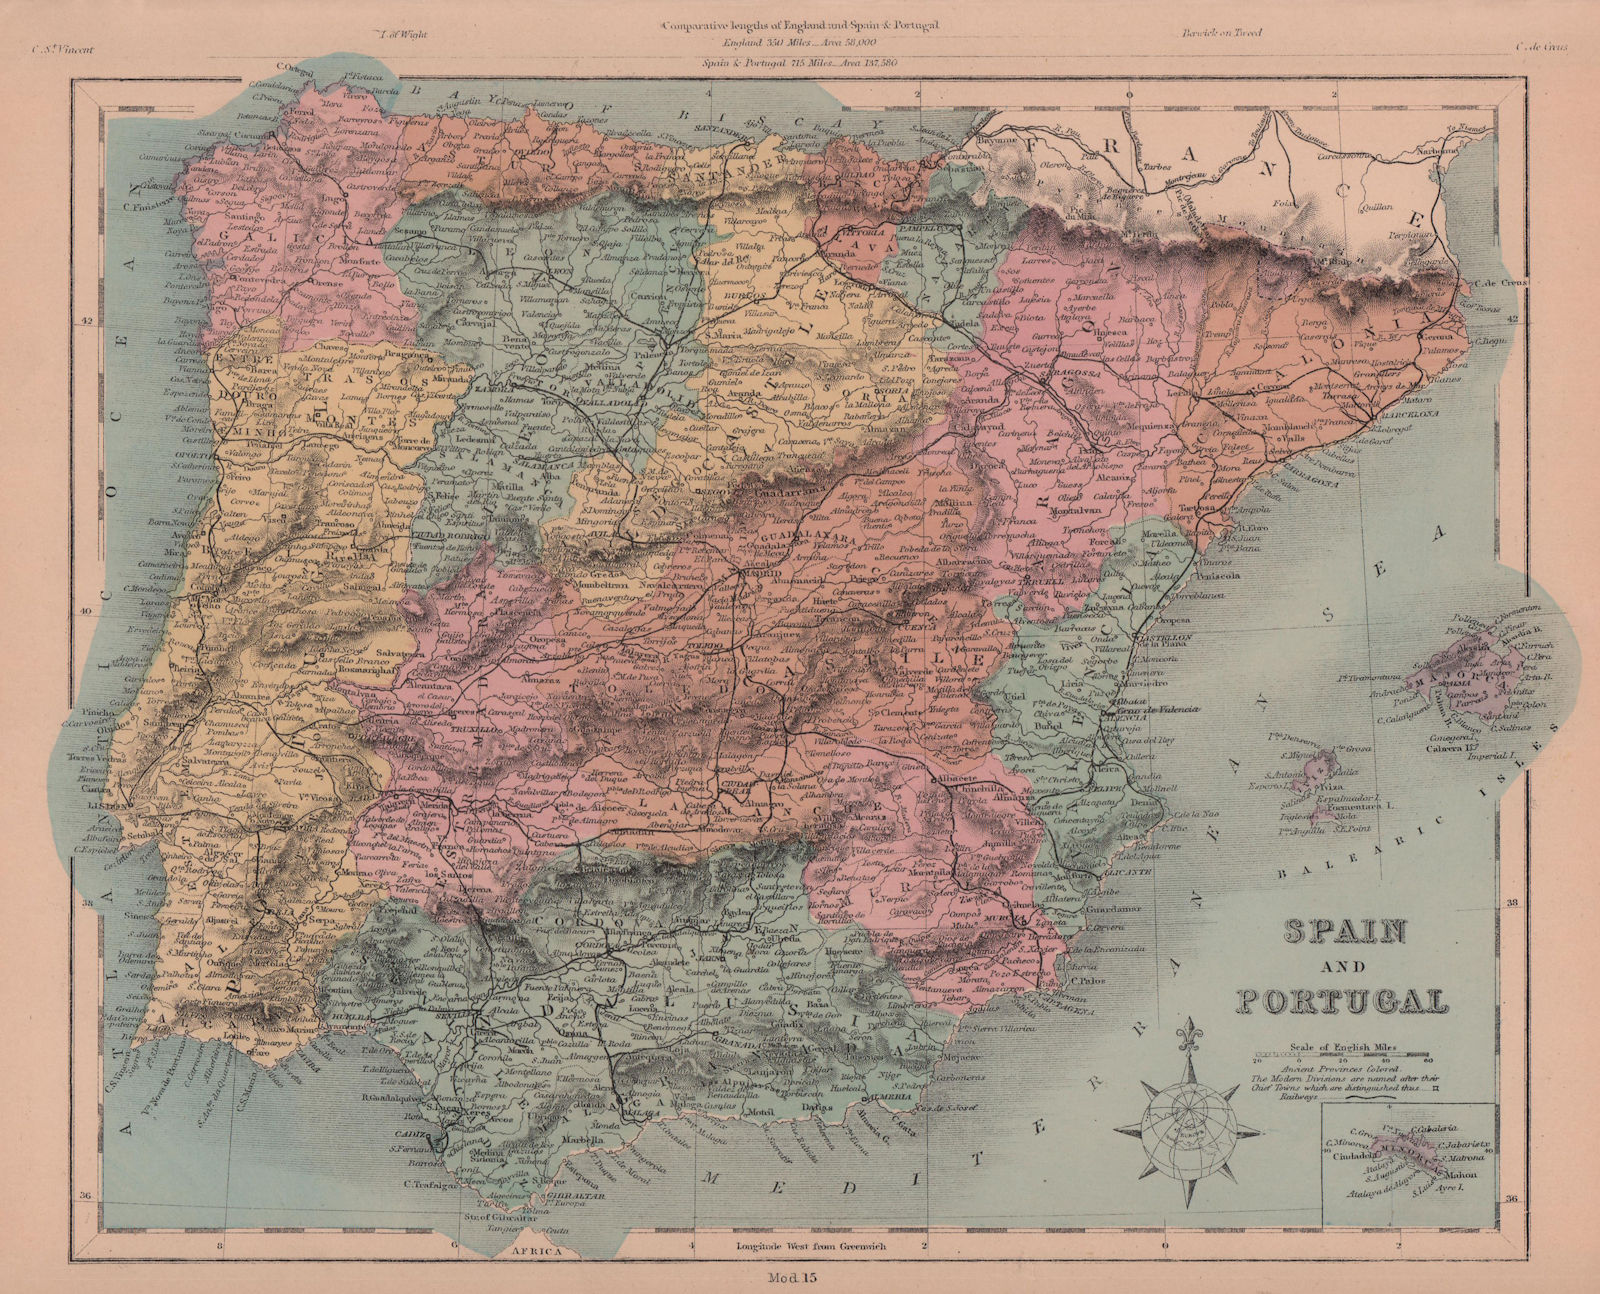 Spain and Portugal. Iberia. Railways. HUGHES 1876 old antique map plan chart